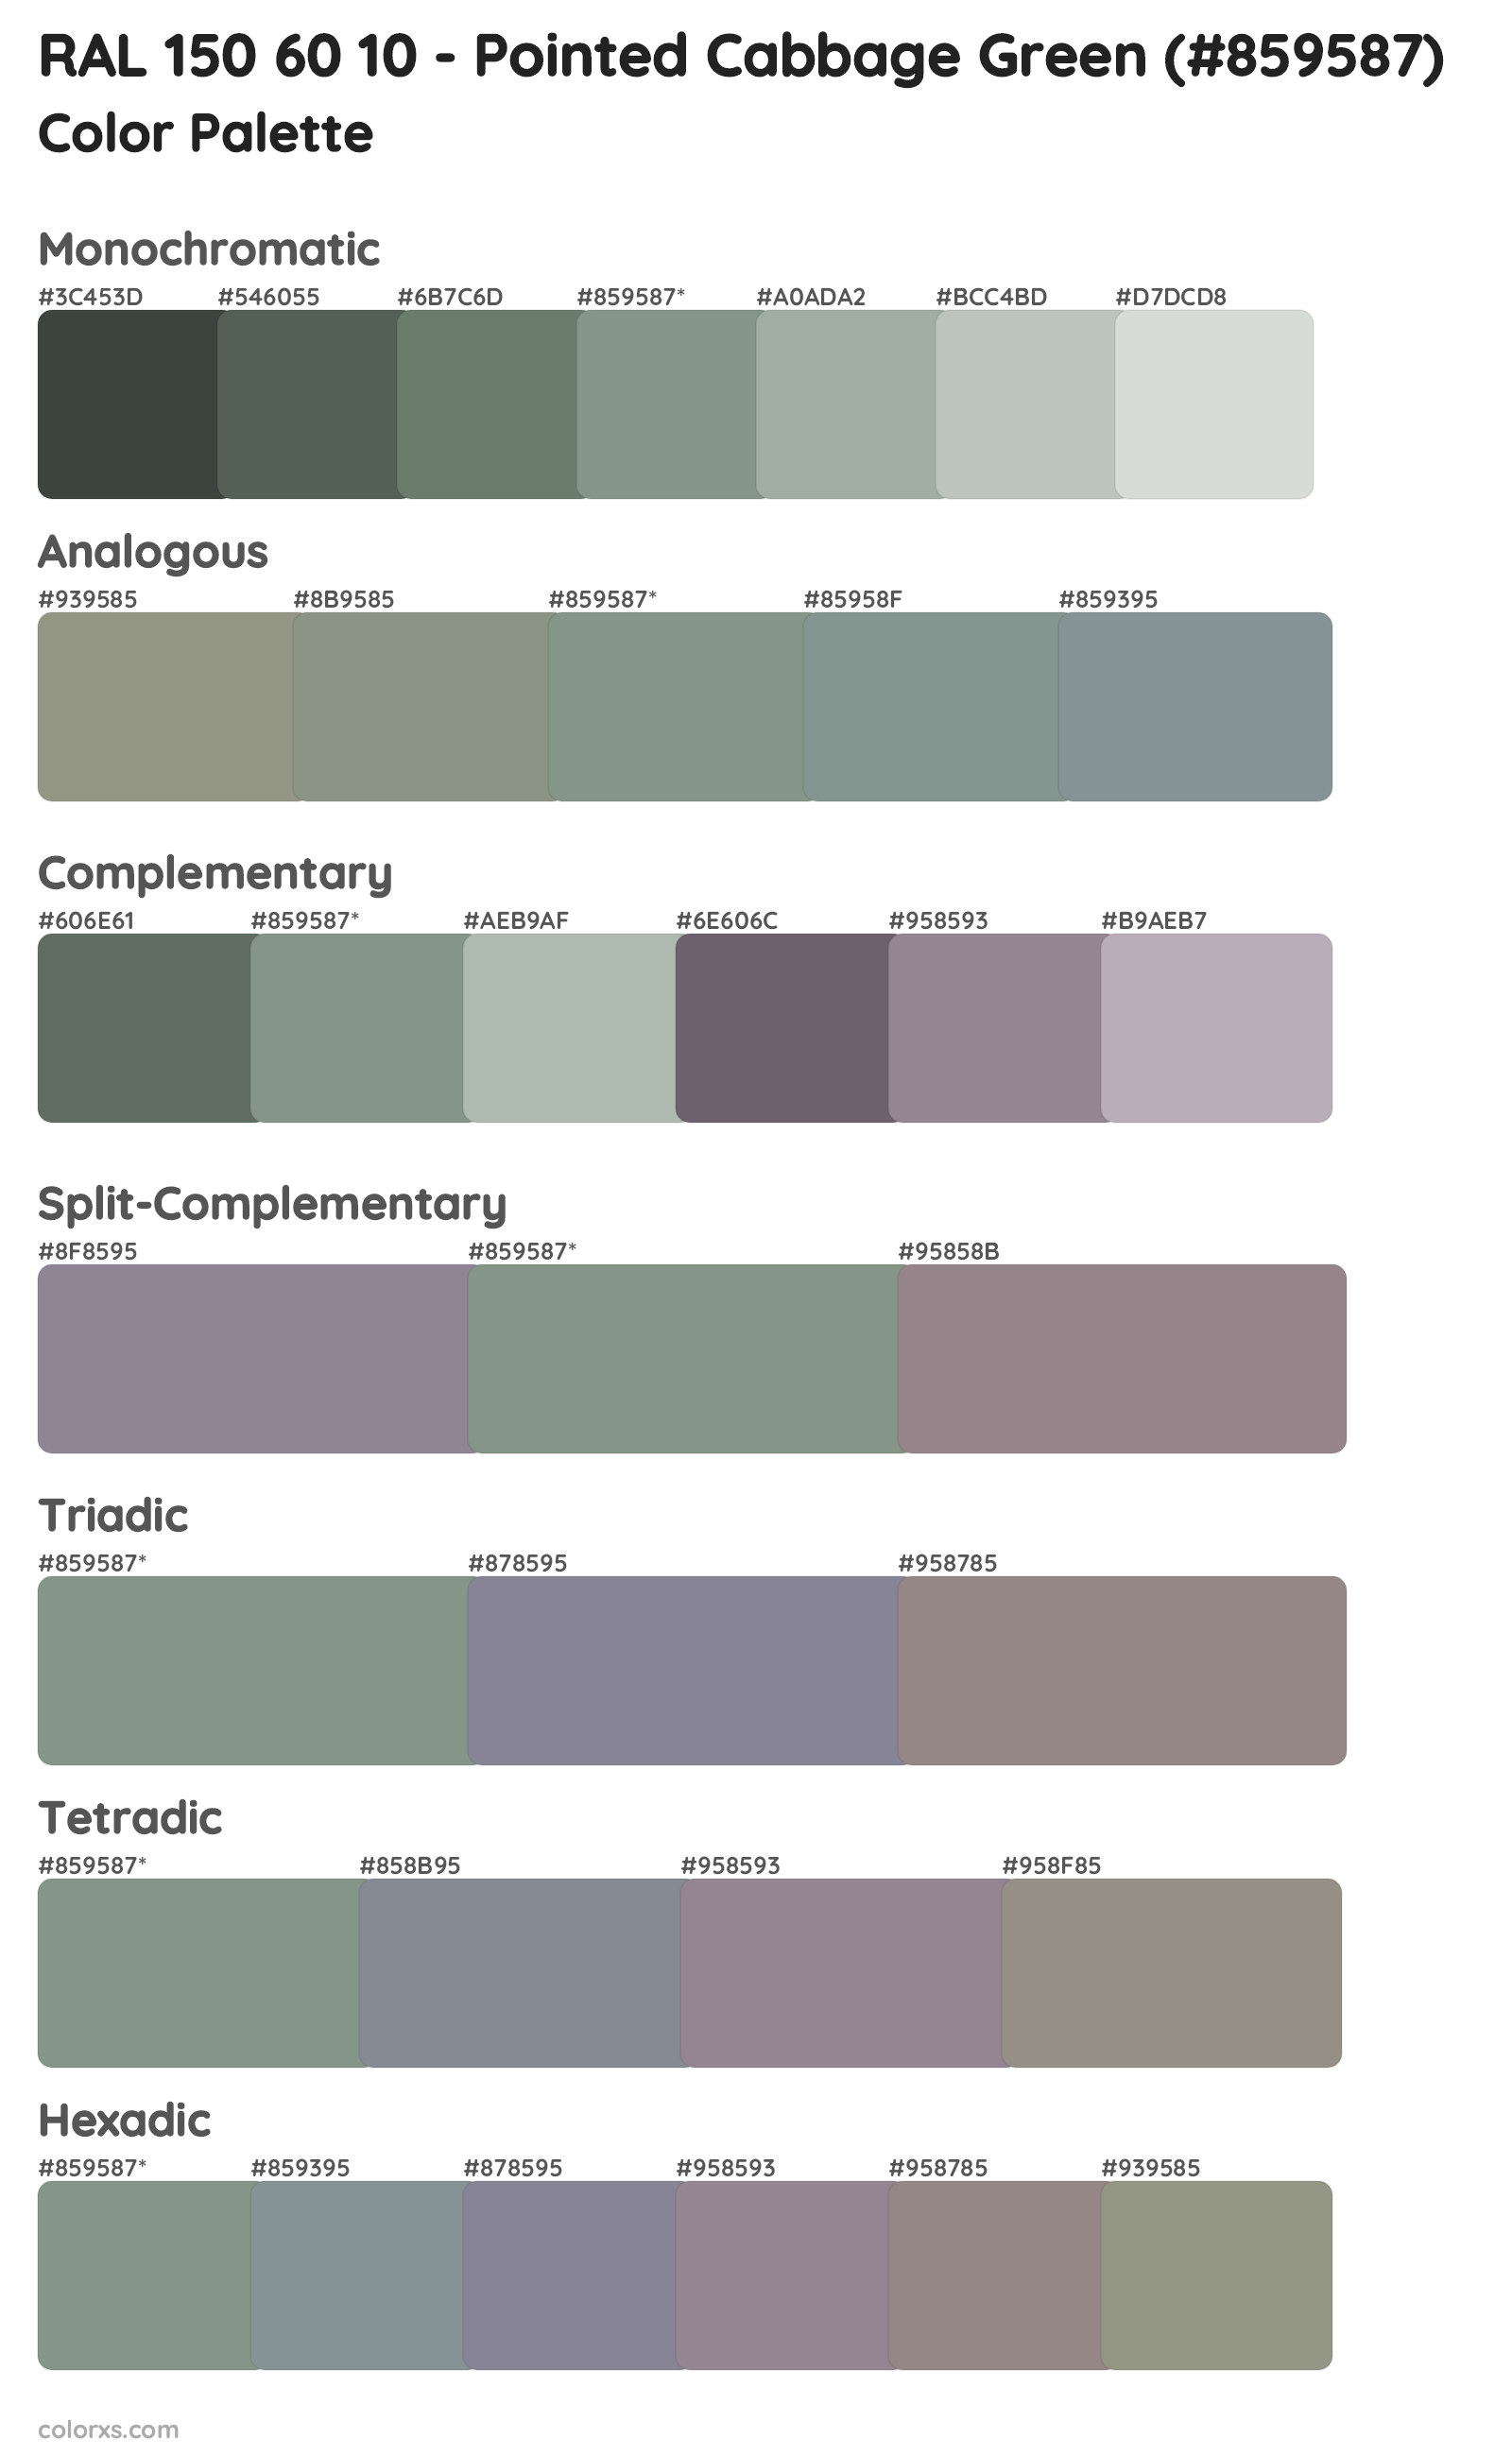 RAL 150 60 10 - Pointed Cabbage Green Color Scheme Palettes